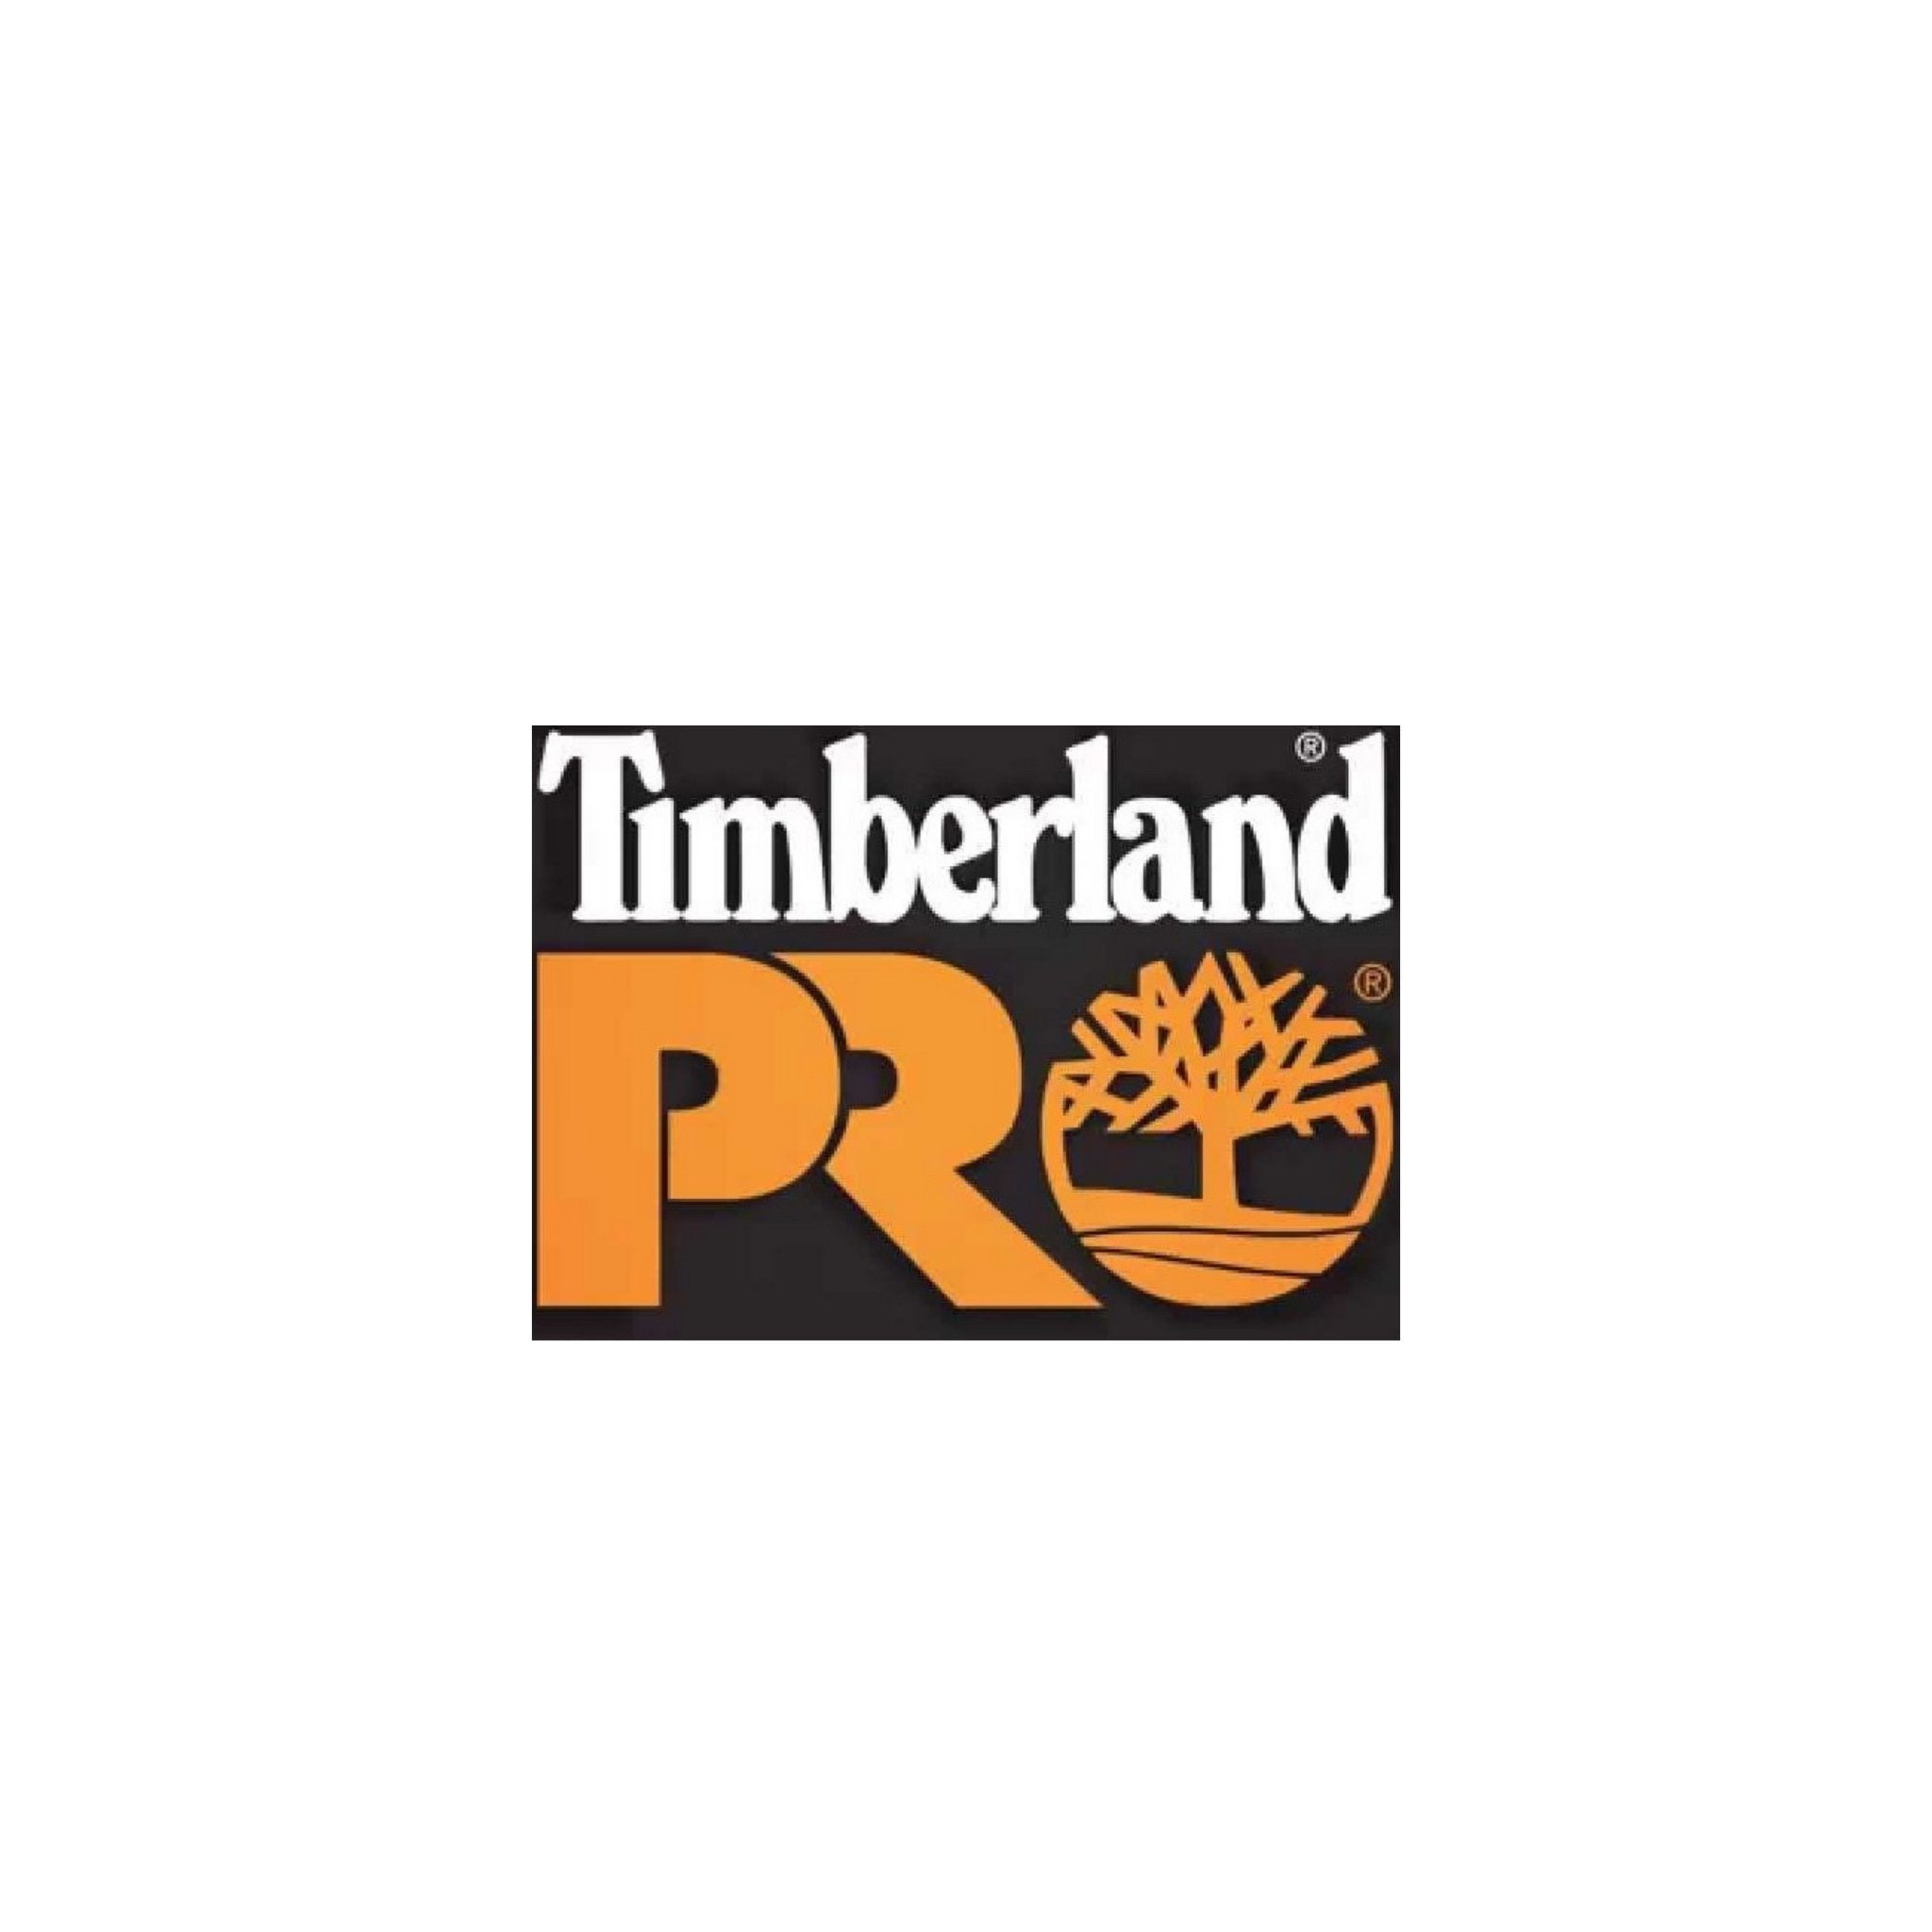 Timberland Pro Collection Cover Image